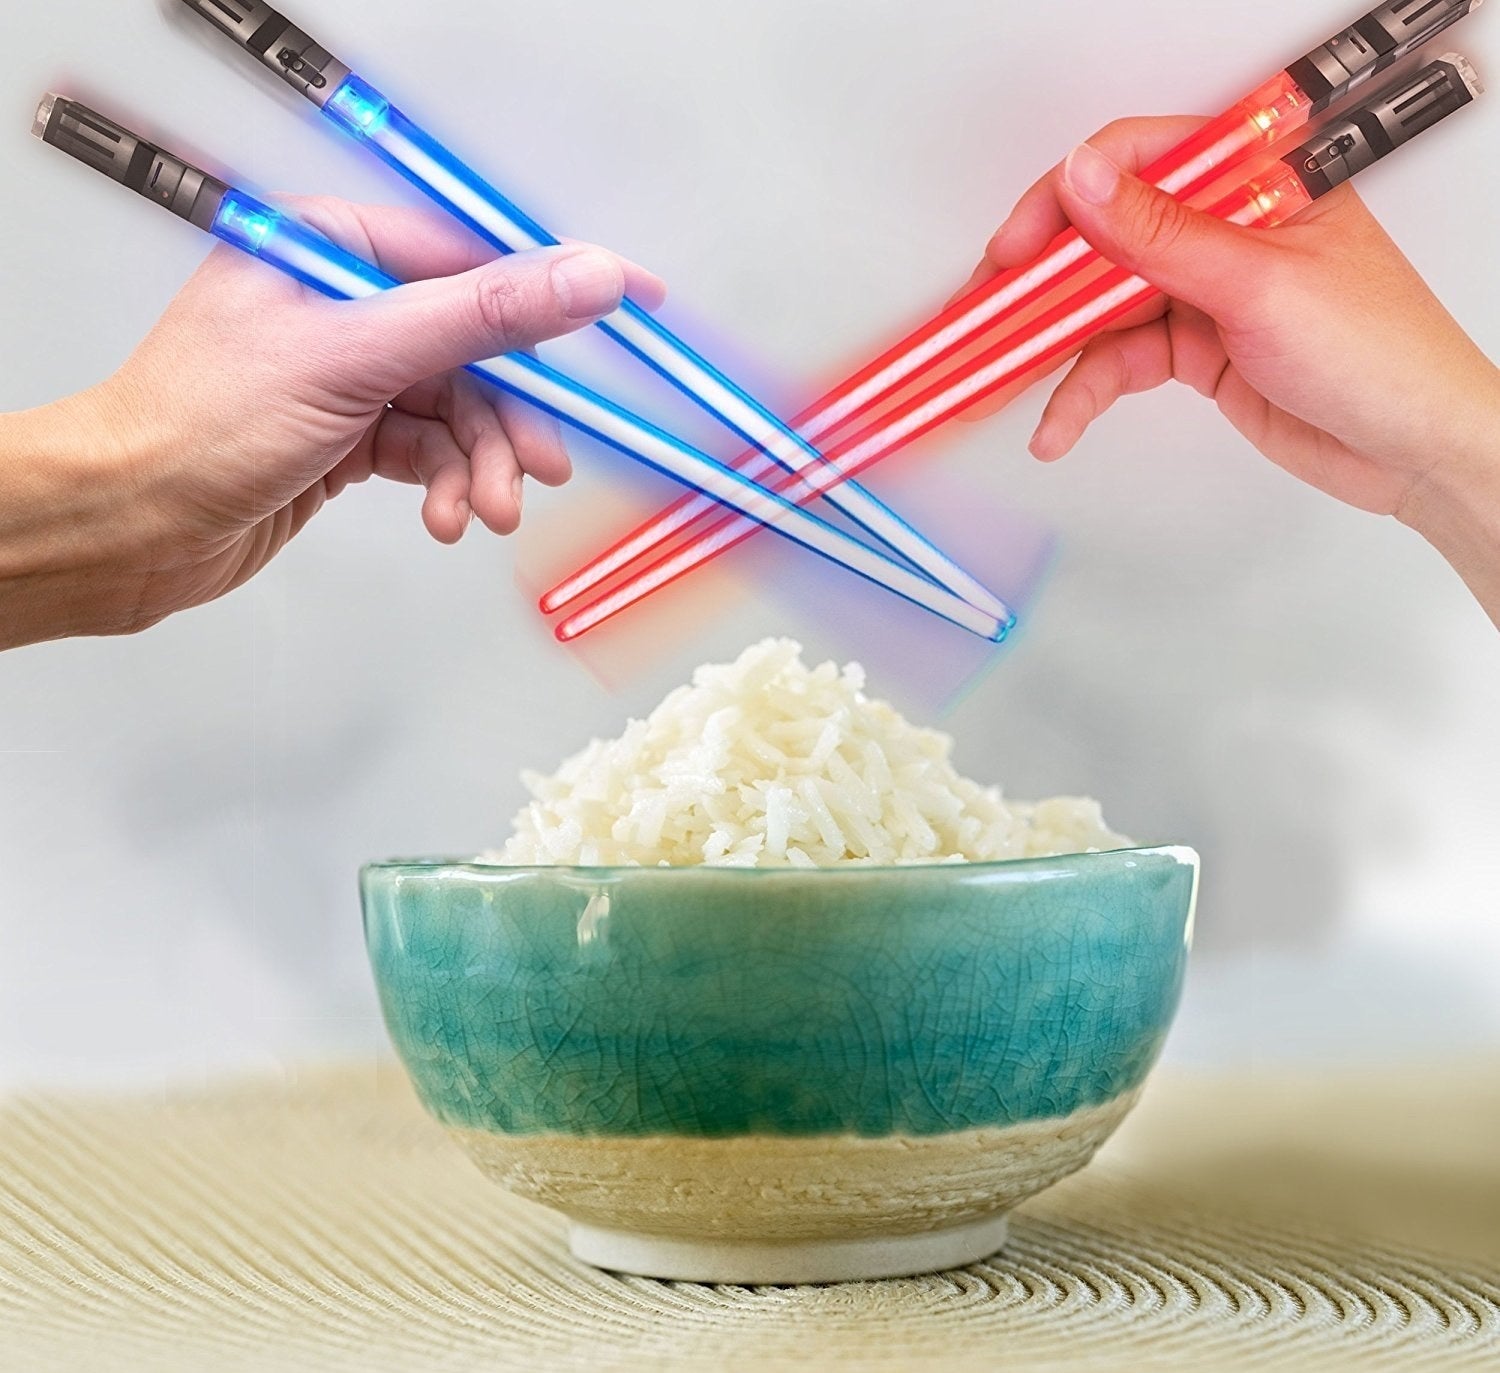 Two handles holding a pair of blue and red chopsticks that look like lightsabers over a bowl of rice